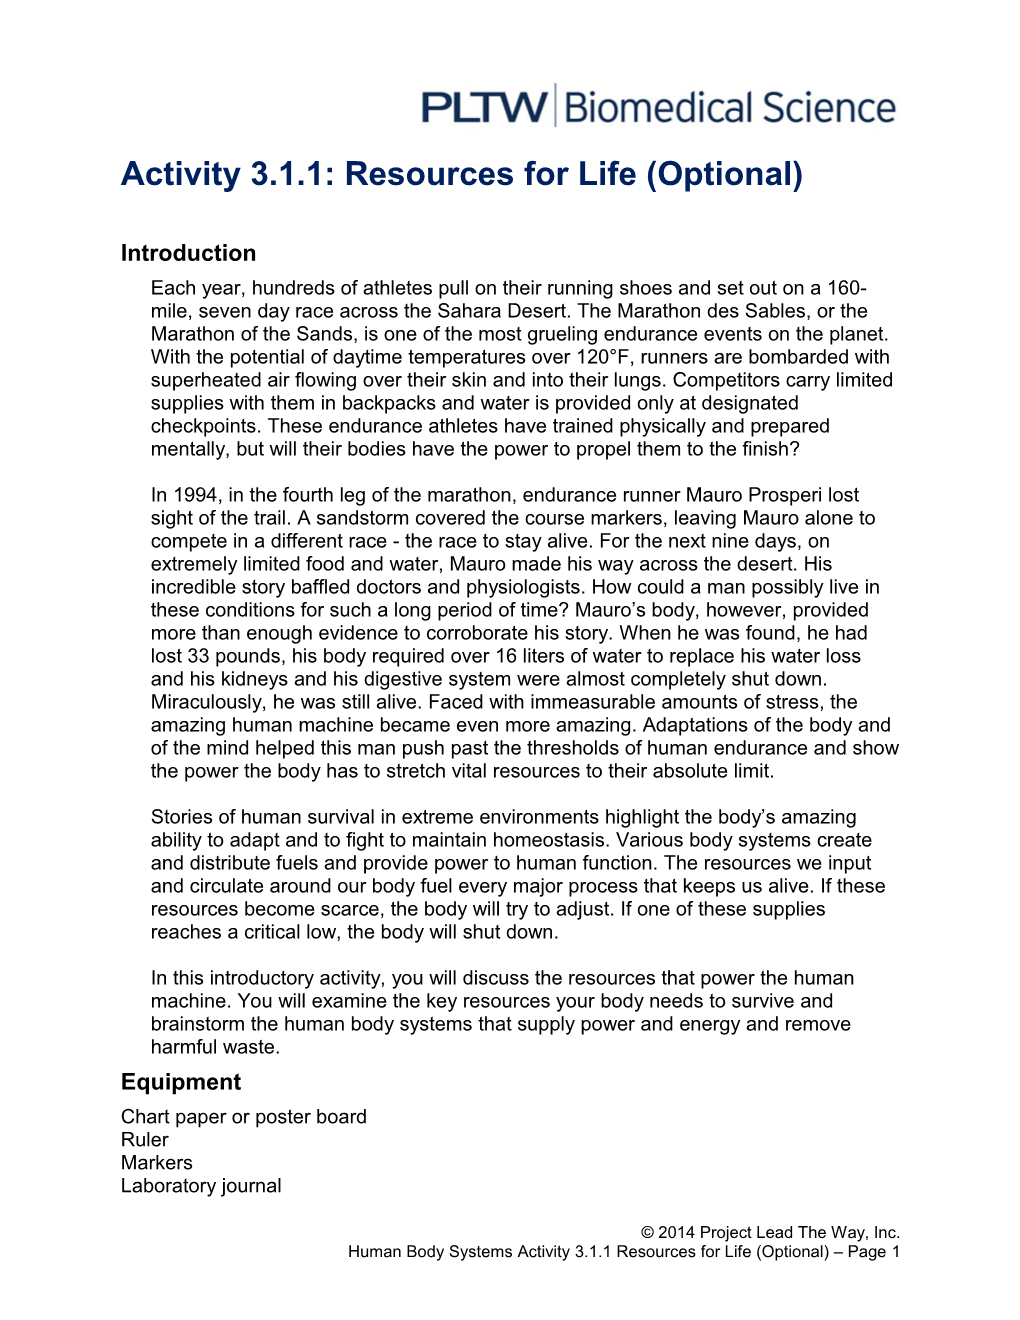 Activity 3.1.1: Resources for Life (Optional)